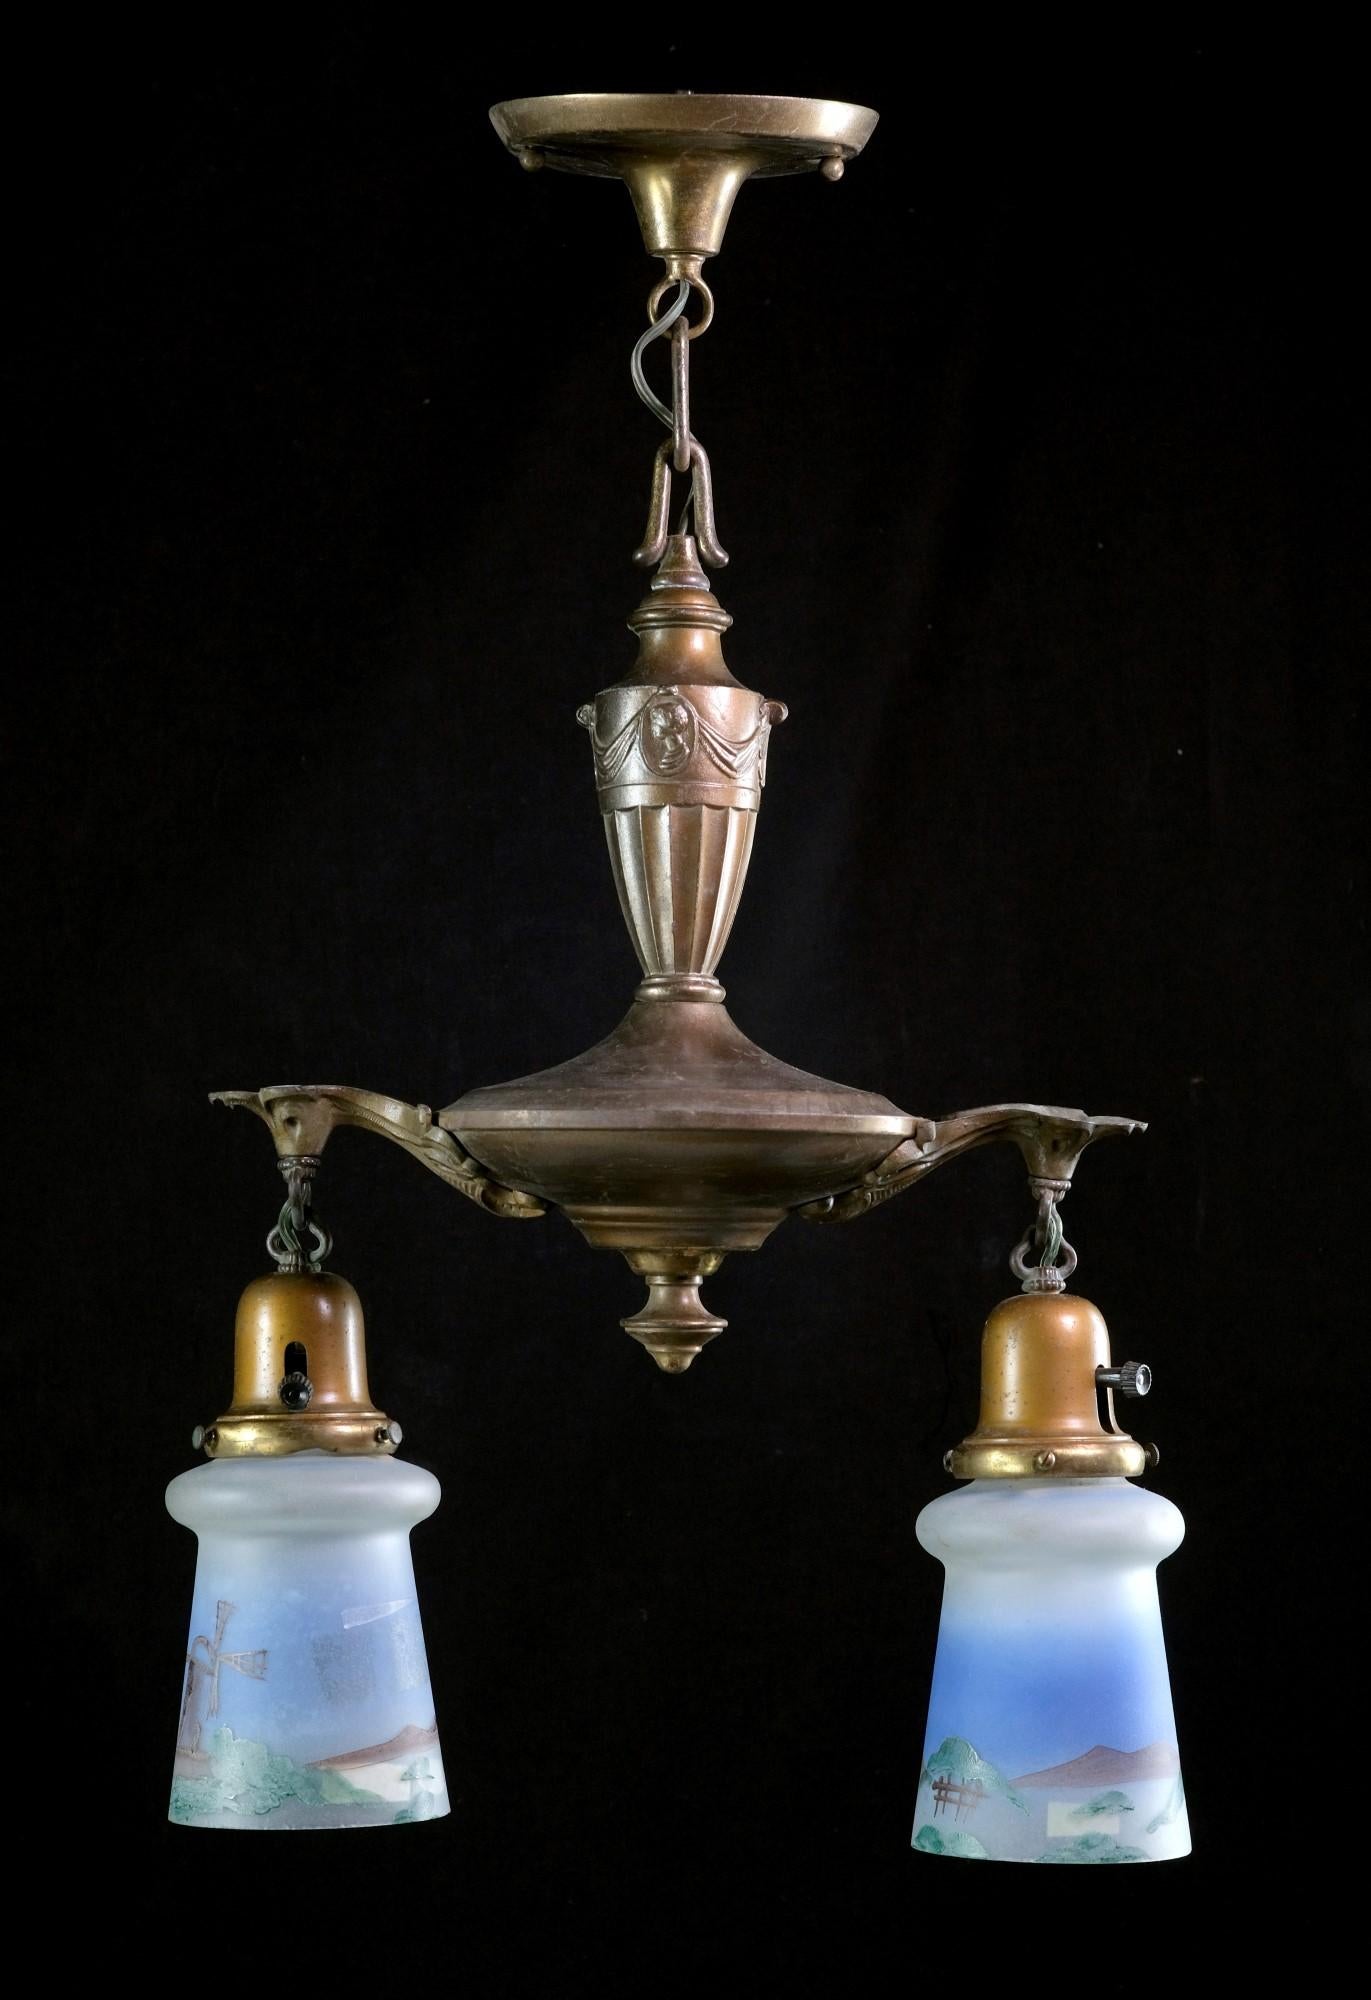 1910's Ornate brass pendant light with two hanging down lights featuring hand-painted shades. This brass light has a Victorian style, and the glass shades are hand-painted with scenic details. The price includes restoration. This can be seen at our